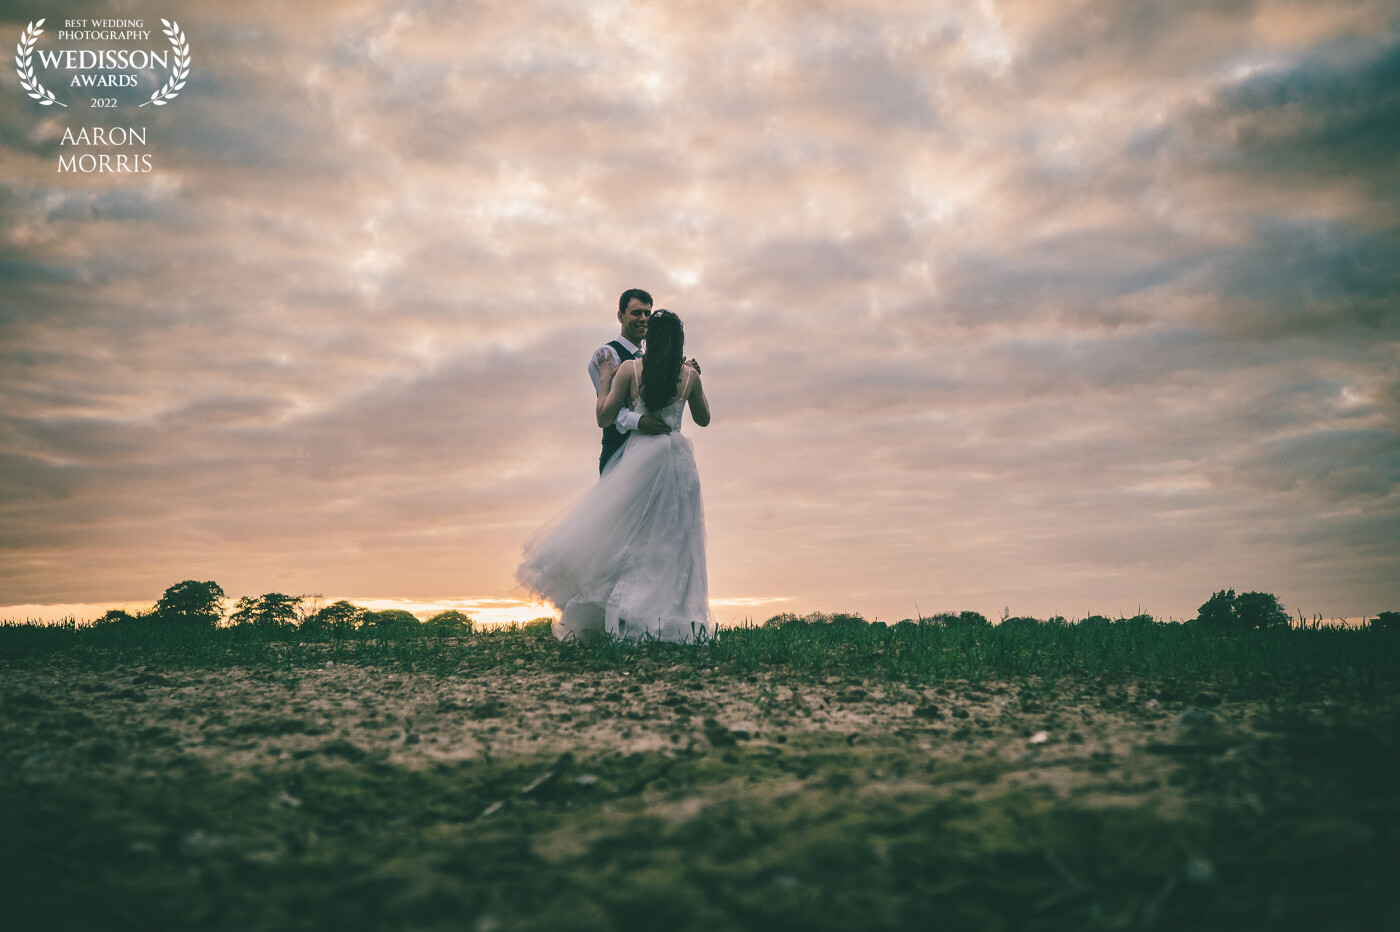 This photo was taken at a special venue to me as it’s where I am soon to be married myself. The couple practised their first dance at sunset in the field outside the venue and as you can see from the photo it was beautifully romantic ????